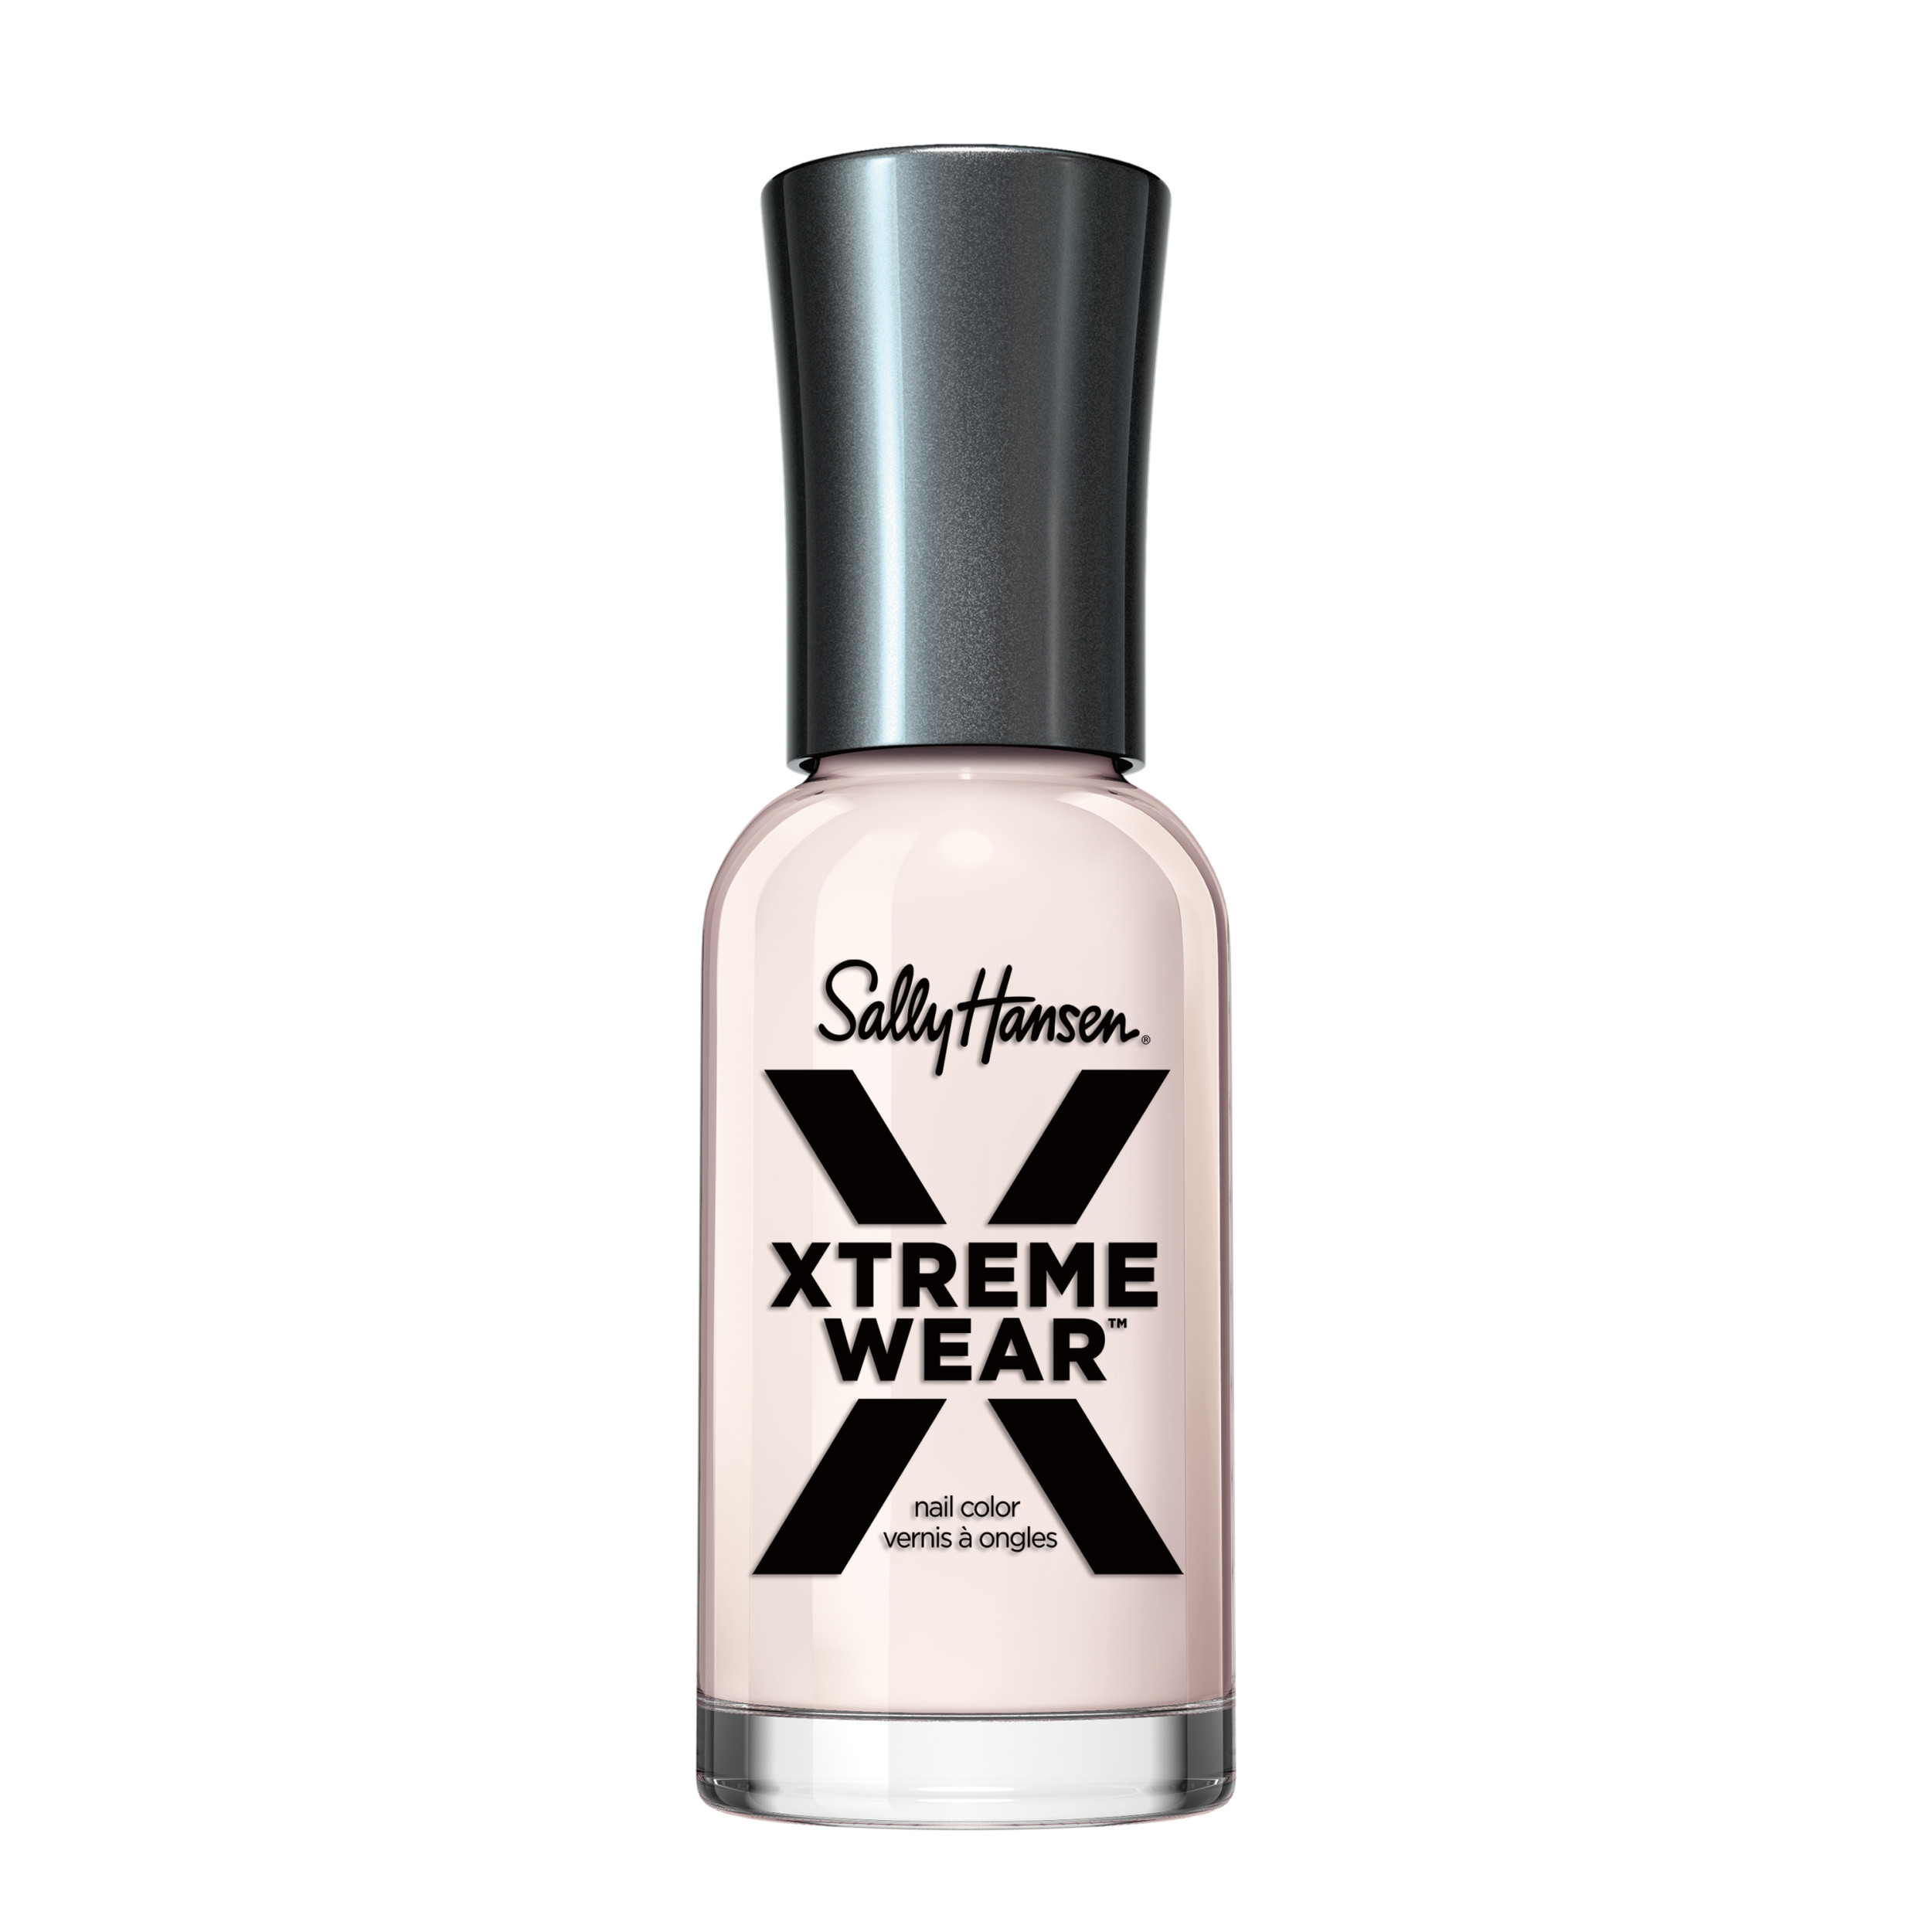 Sally Hansen Xtreme Wear Nail Color, Daycream, 0.4 oz, Color Nail Polish, Nail Polish, Quick Dry Nail Polish, Nail Polish Colors, Chip Resistant, Bold Color - image 1 of 13